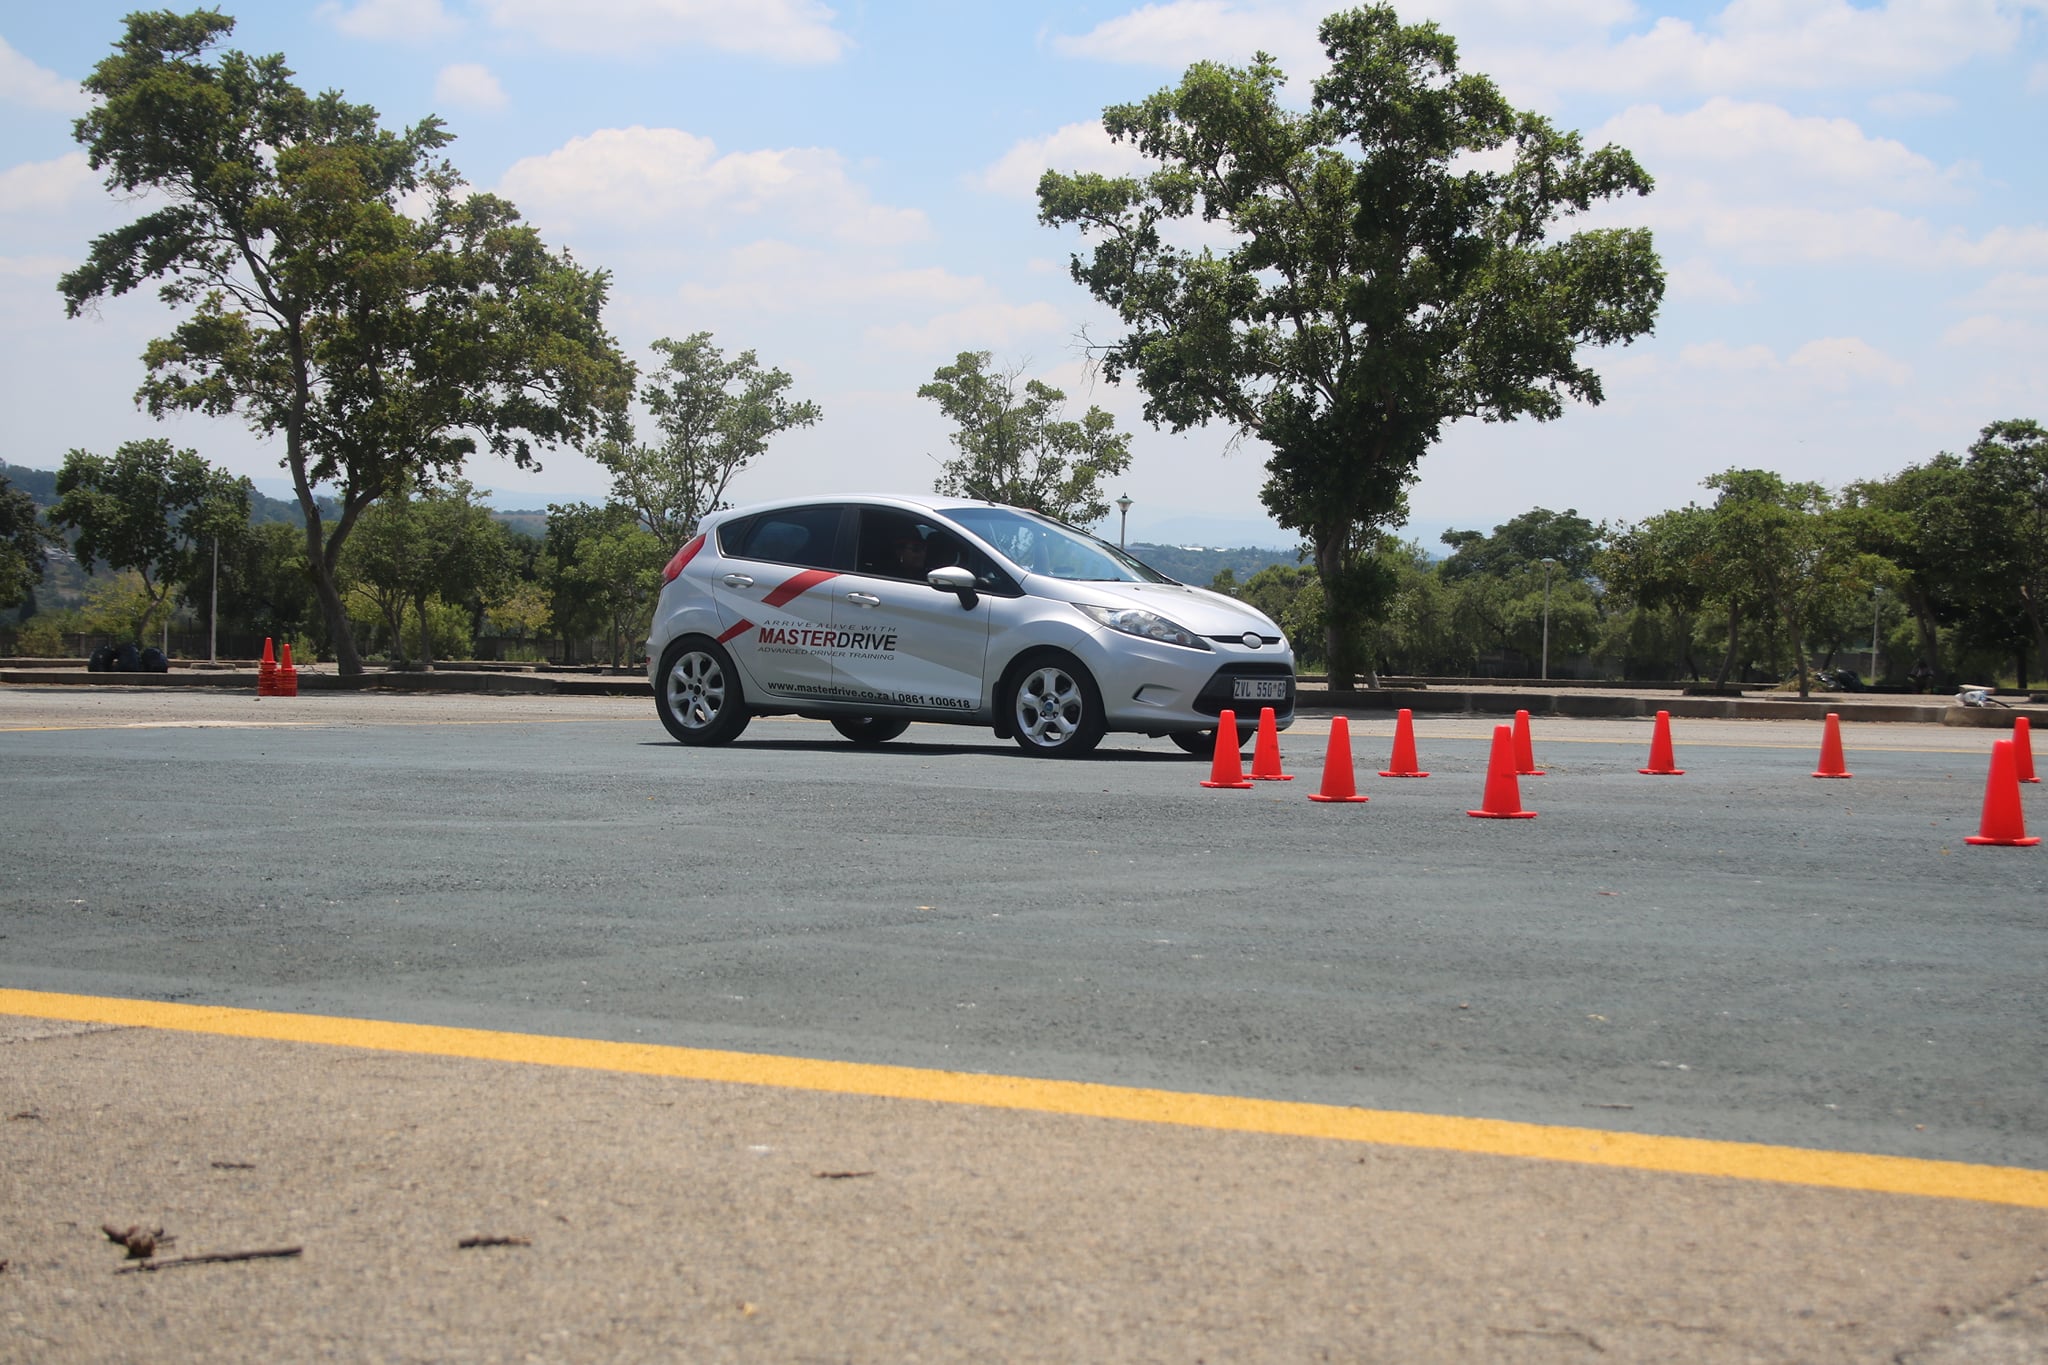 Why is going on an advanced driving course a good idea?